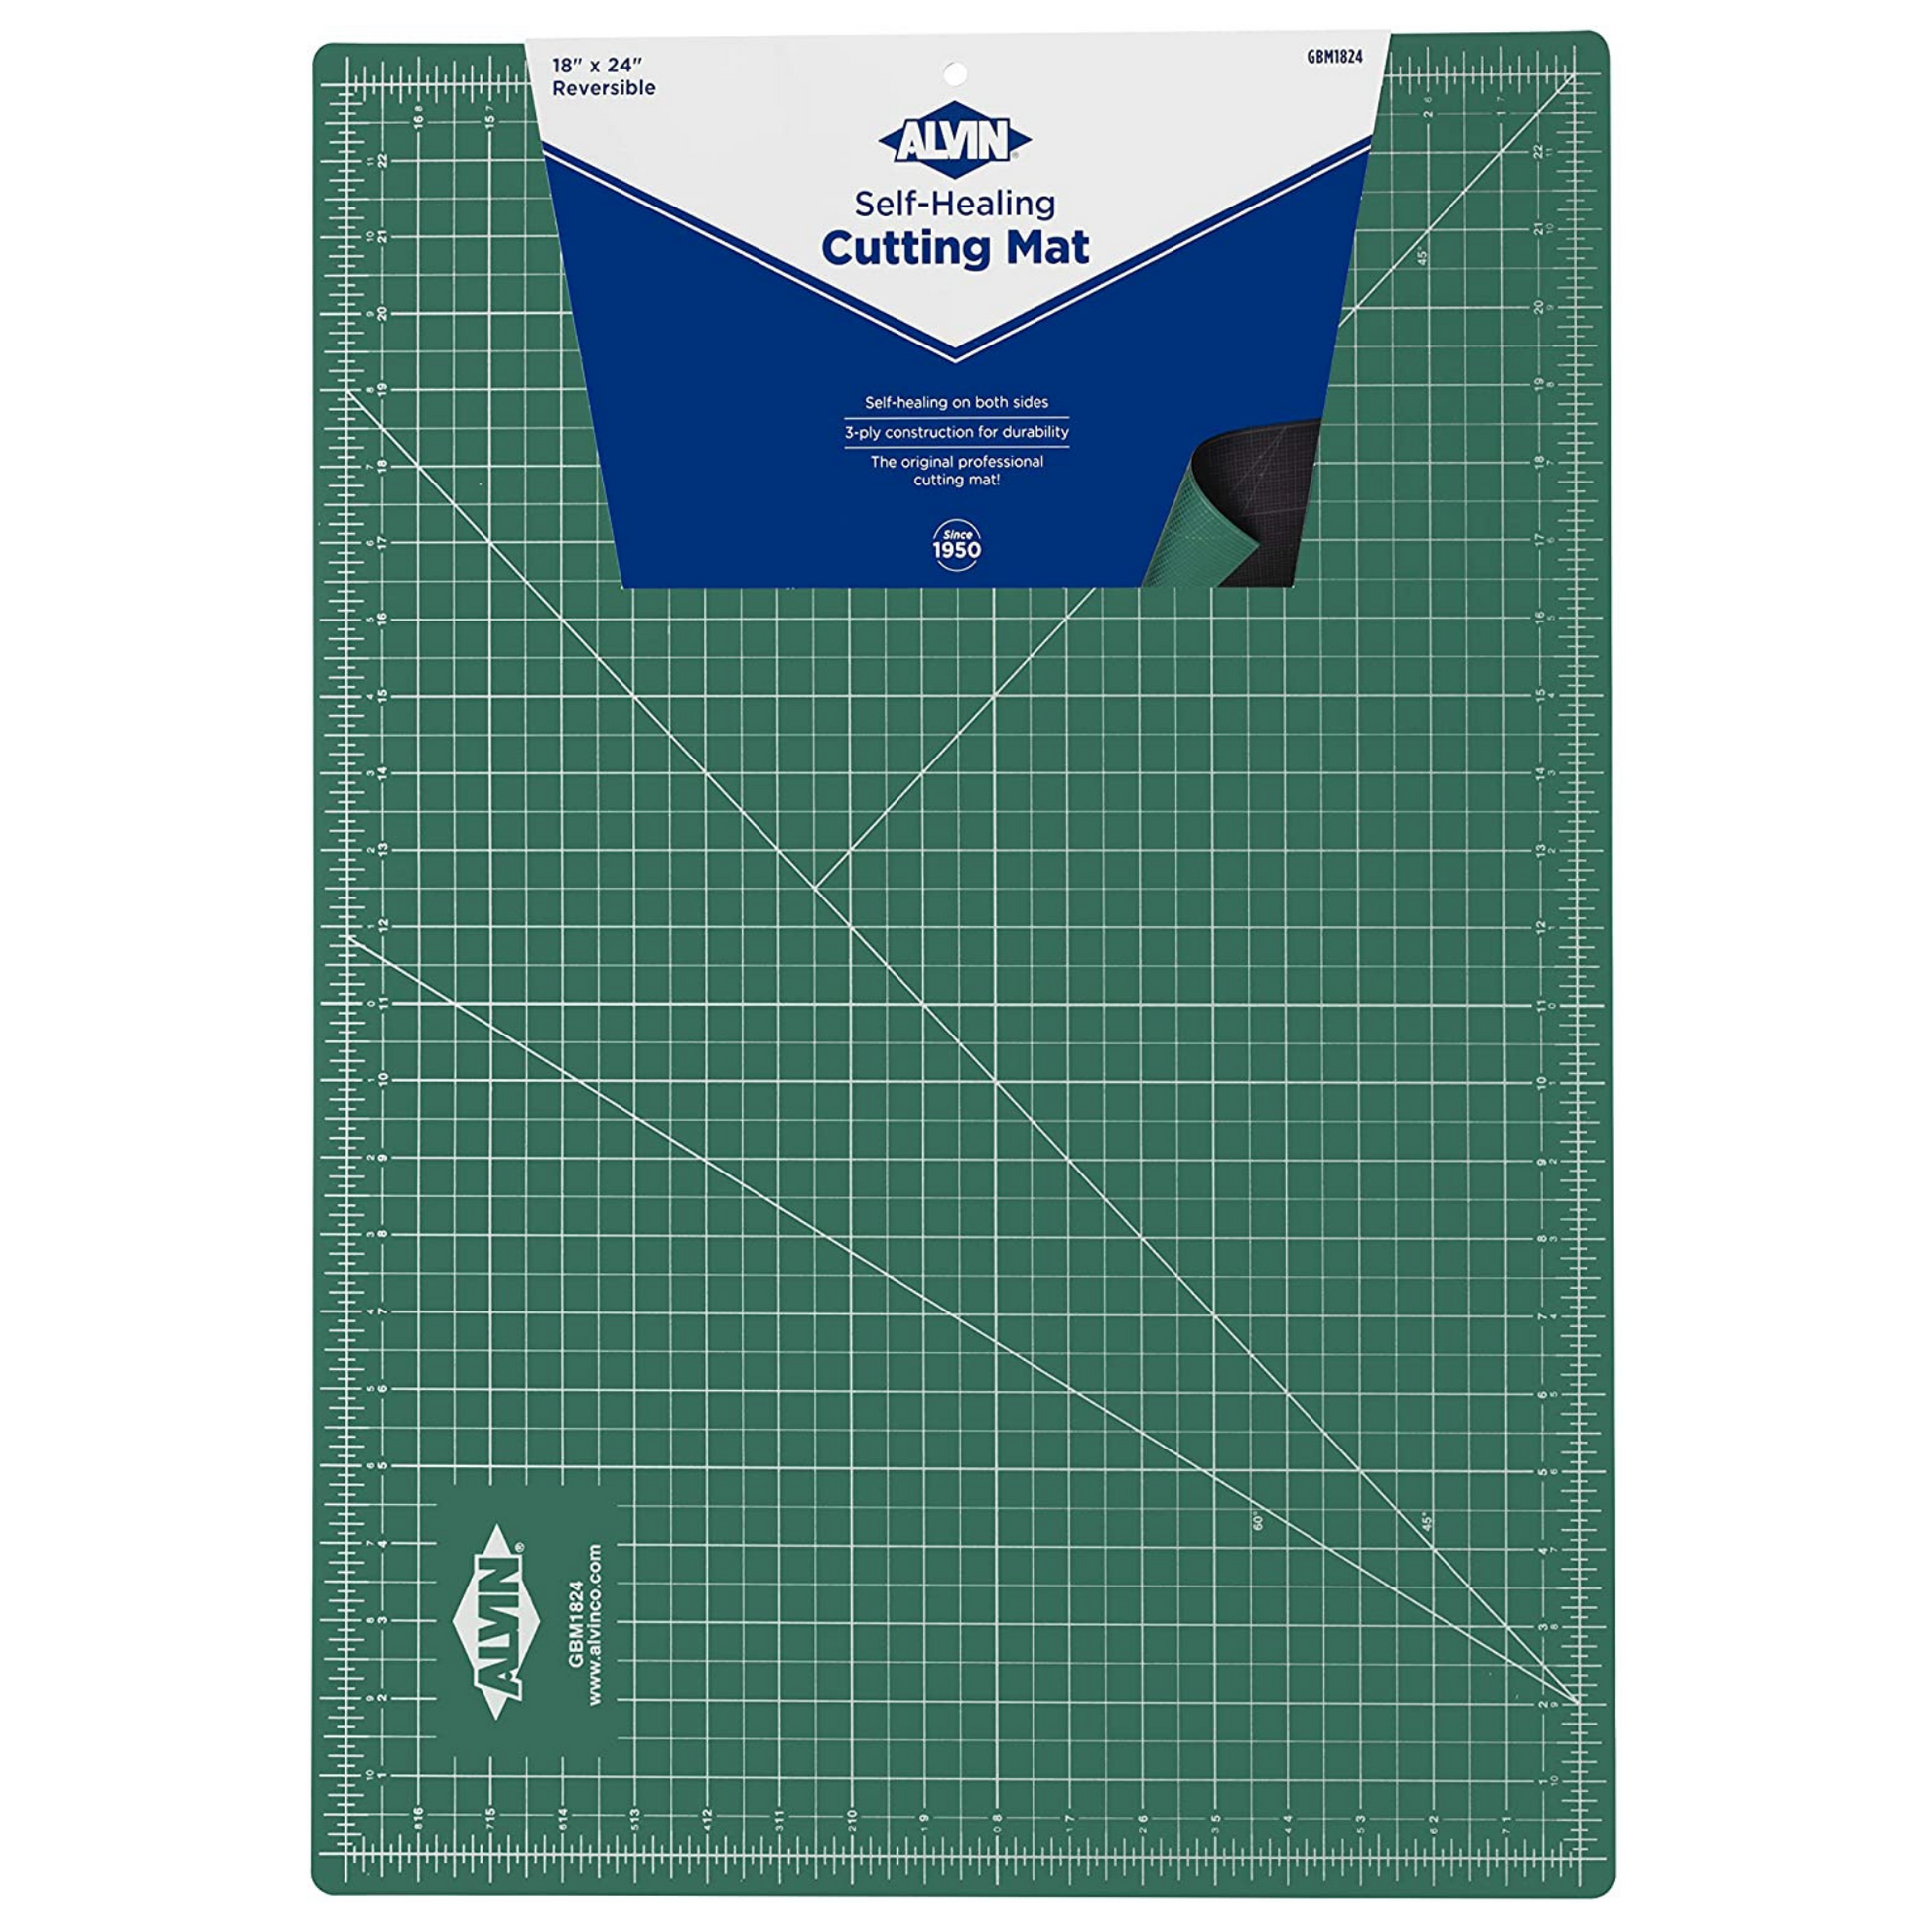 ALVIN GBM2436 Series Professional Self-Healing Cutting Mat, Green/Black  Double-Sided 24 x 36 inches - Paragon Visual